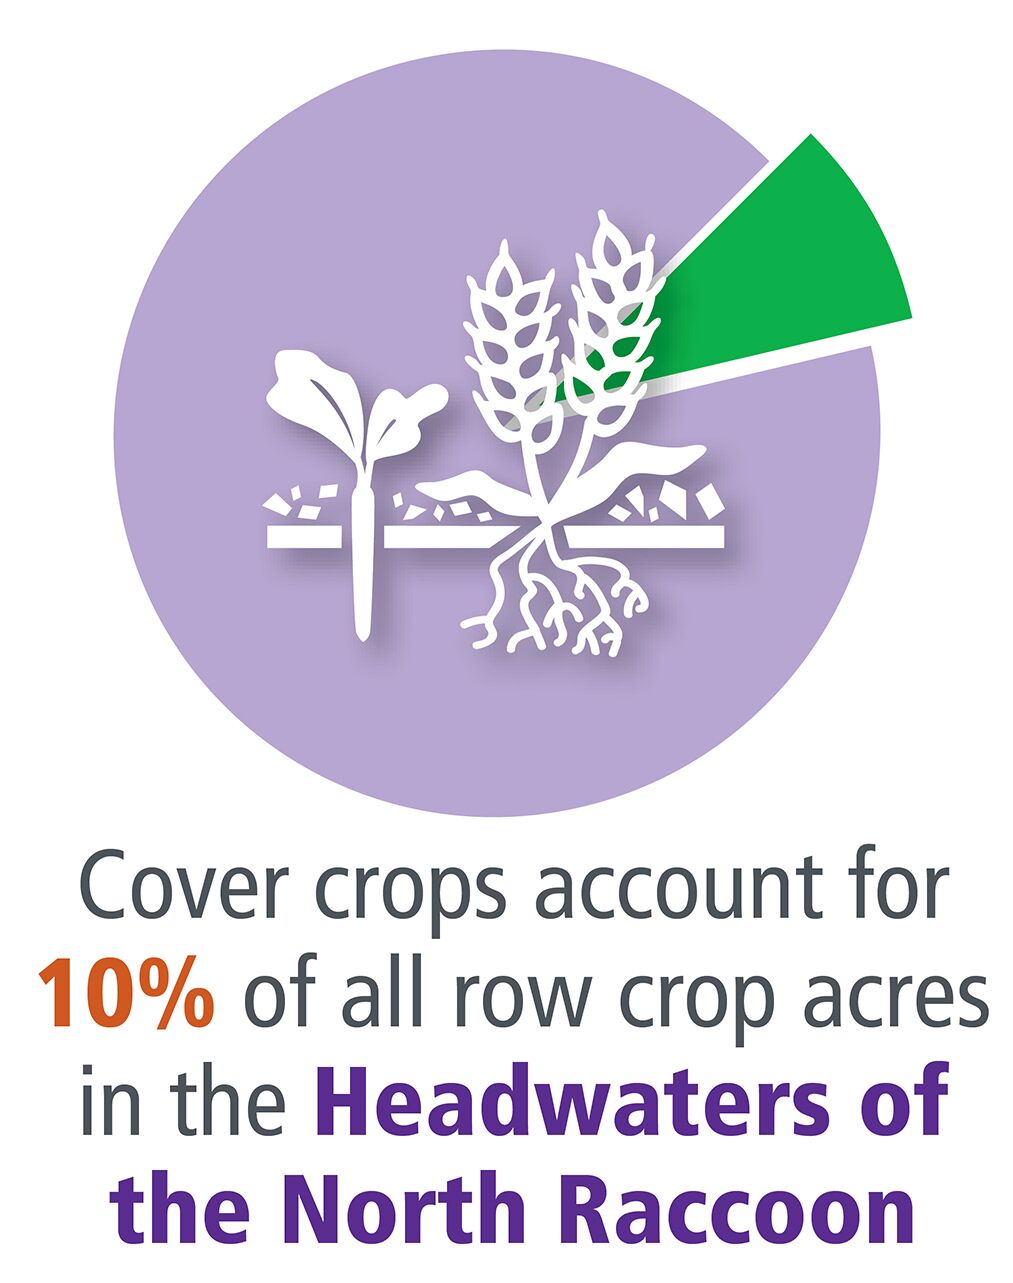 Cover crops account for 10% of all row crop acres in the headwaters of the North Raccoon.